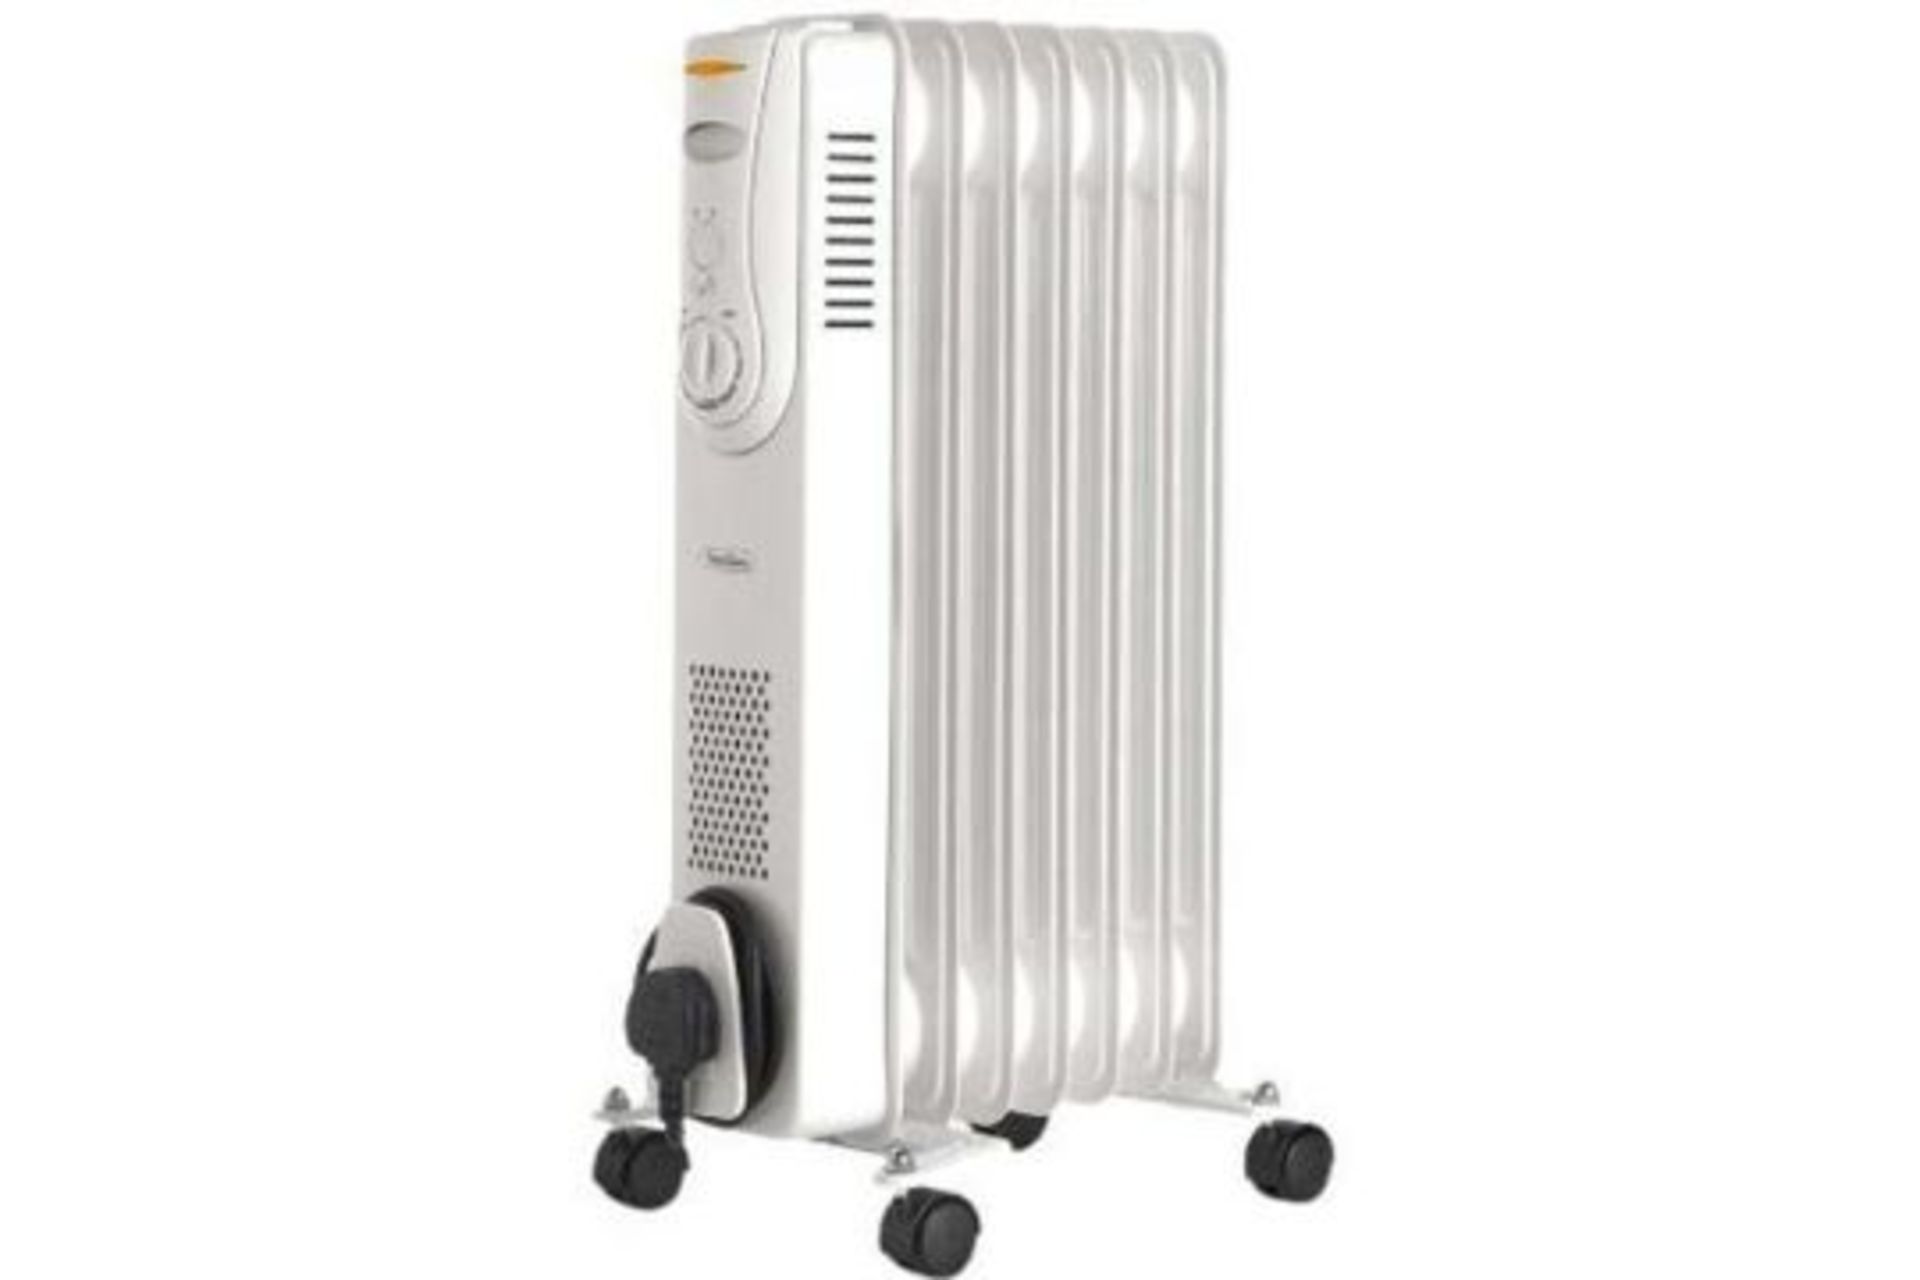 Luxury Oil Radiator 7 Ribs, 1500 W, White (ER51) It has 7 oil-filled fins for efficient heating of